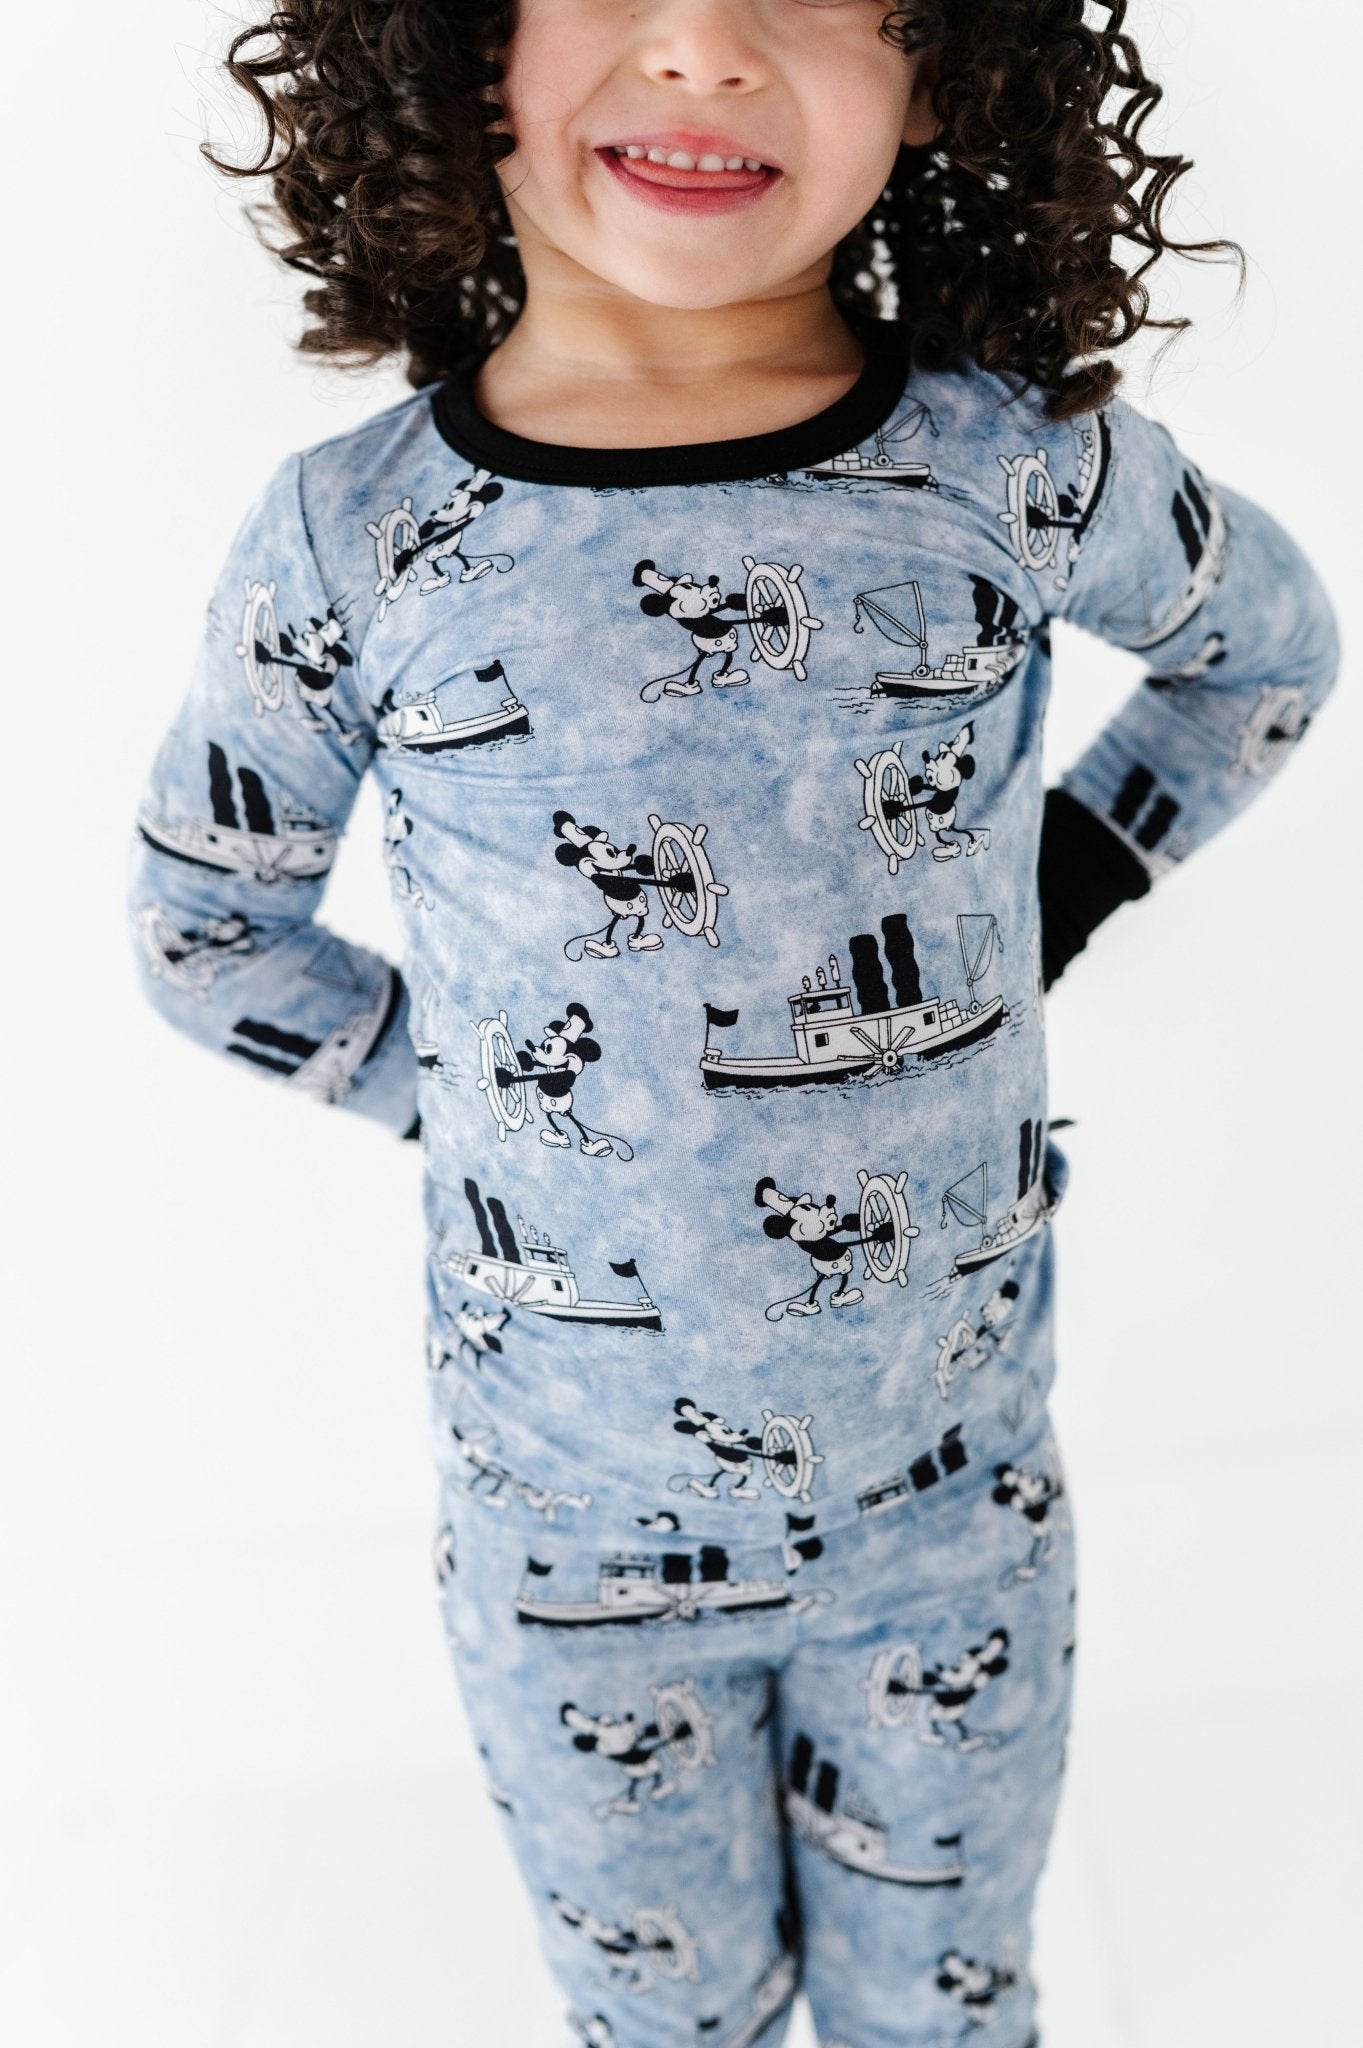 TWO PIECE JAMMIES - STEAMBOAT WILLIE - The Sleepy Sloth